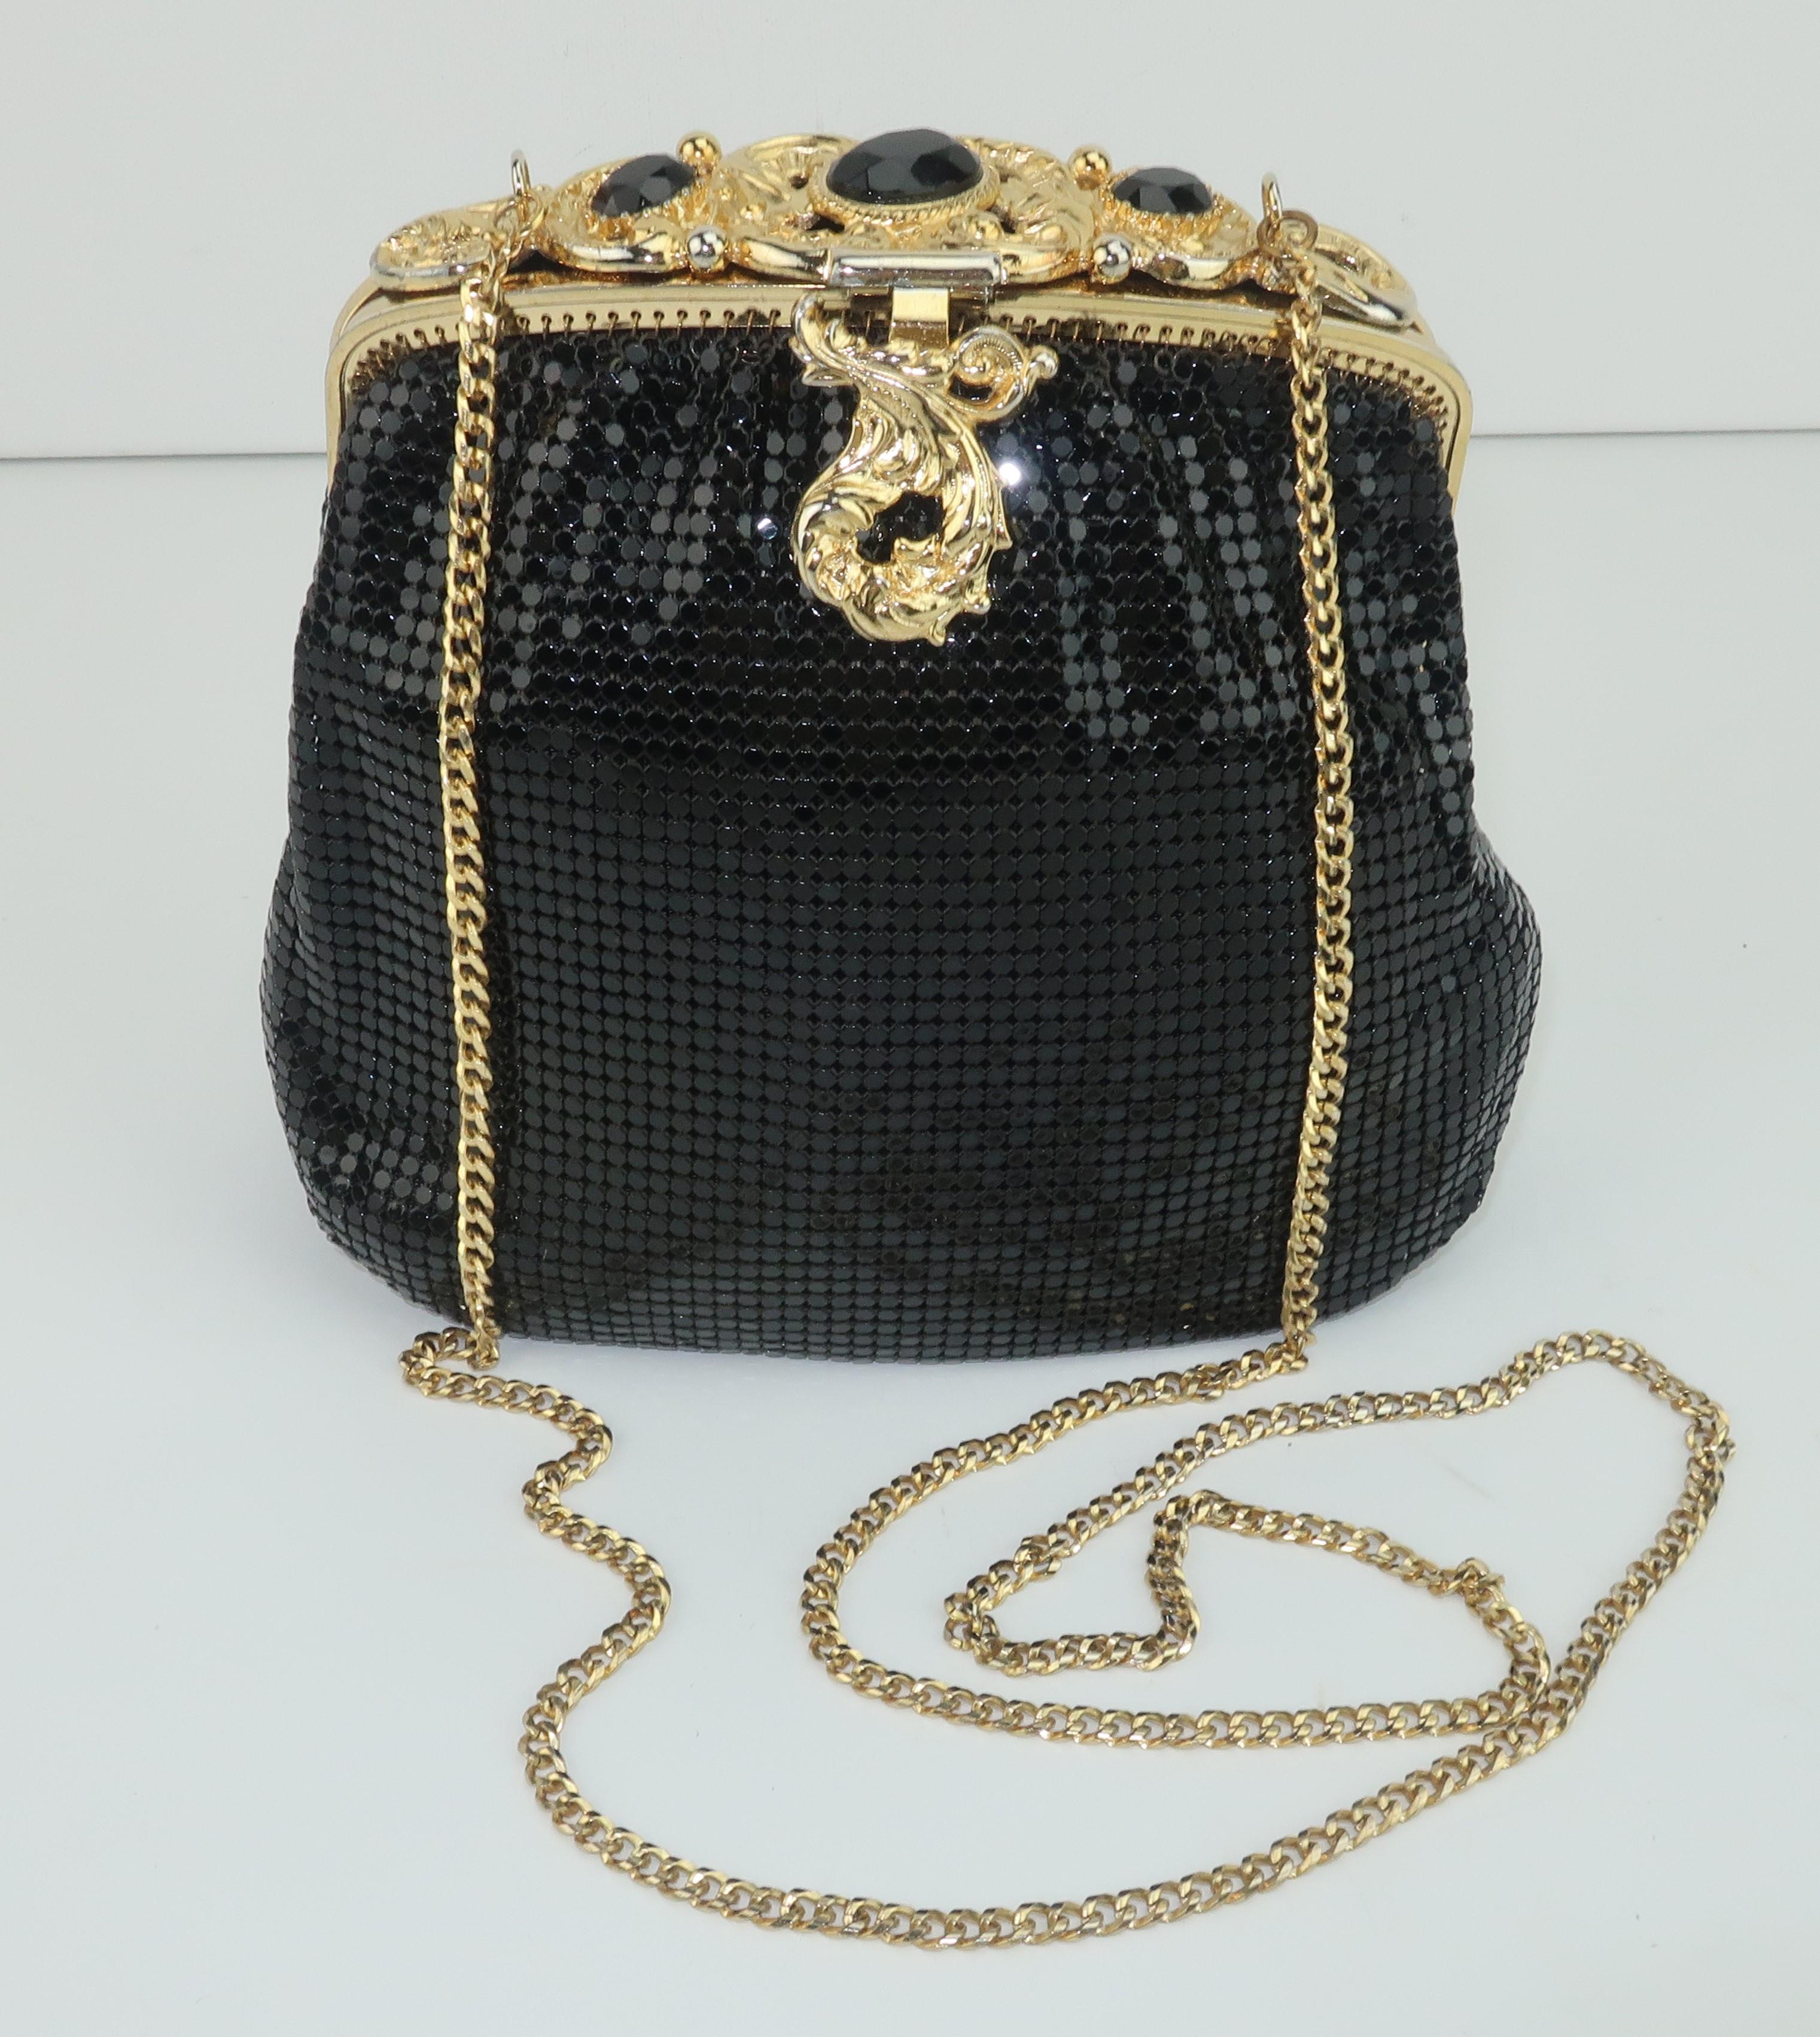 This classic Whiting & Davis black chain mail mesh handbag will take you from deco to disco!  Whiting & Davis has been producing fashionable handbags since the late 1800’s and their mesh designs represent classic American glamour.  The ornate gold